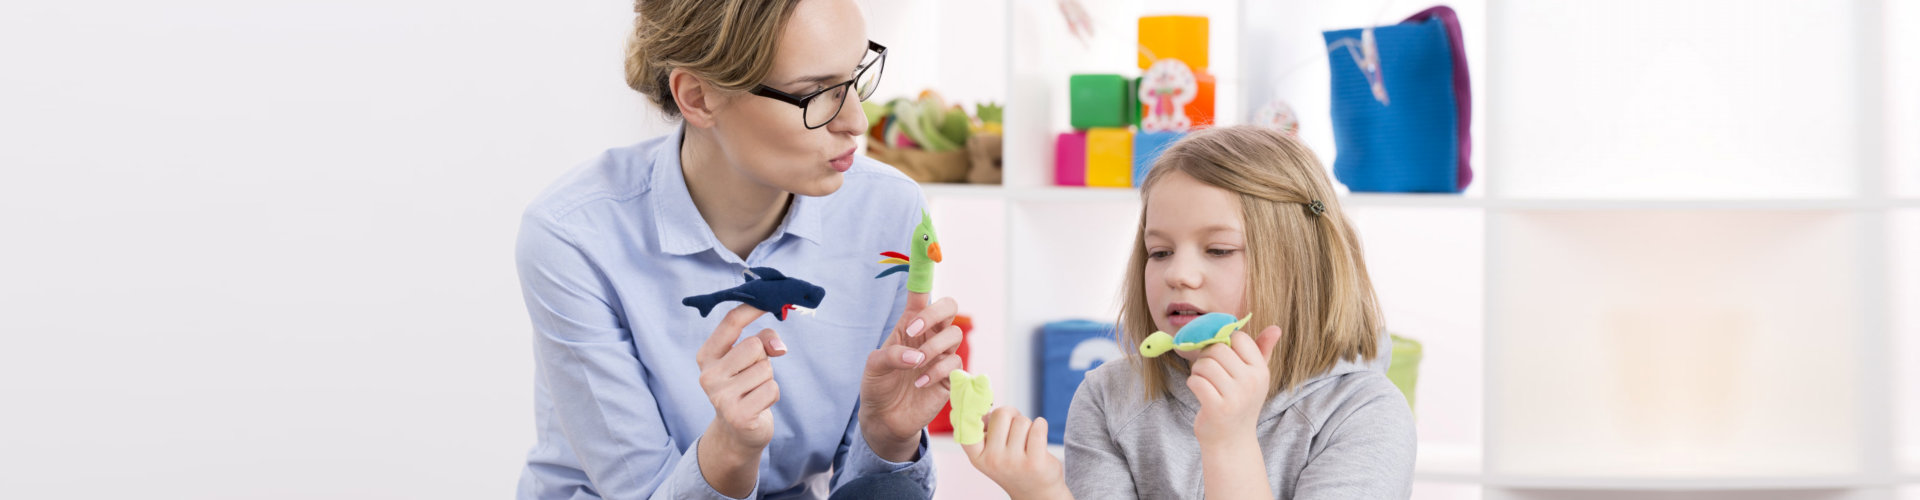 teacher using colorful toys during play therapy with child